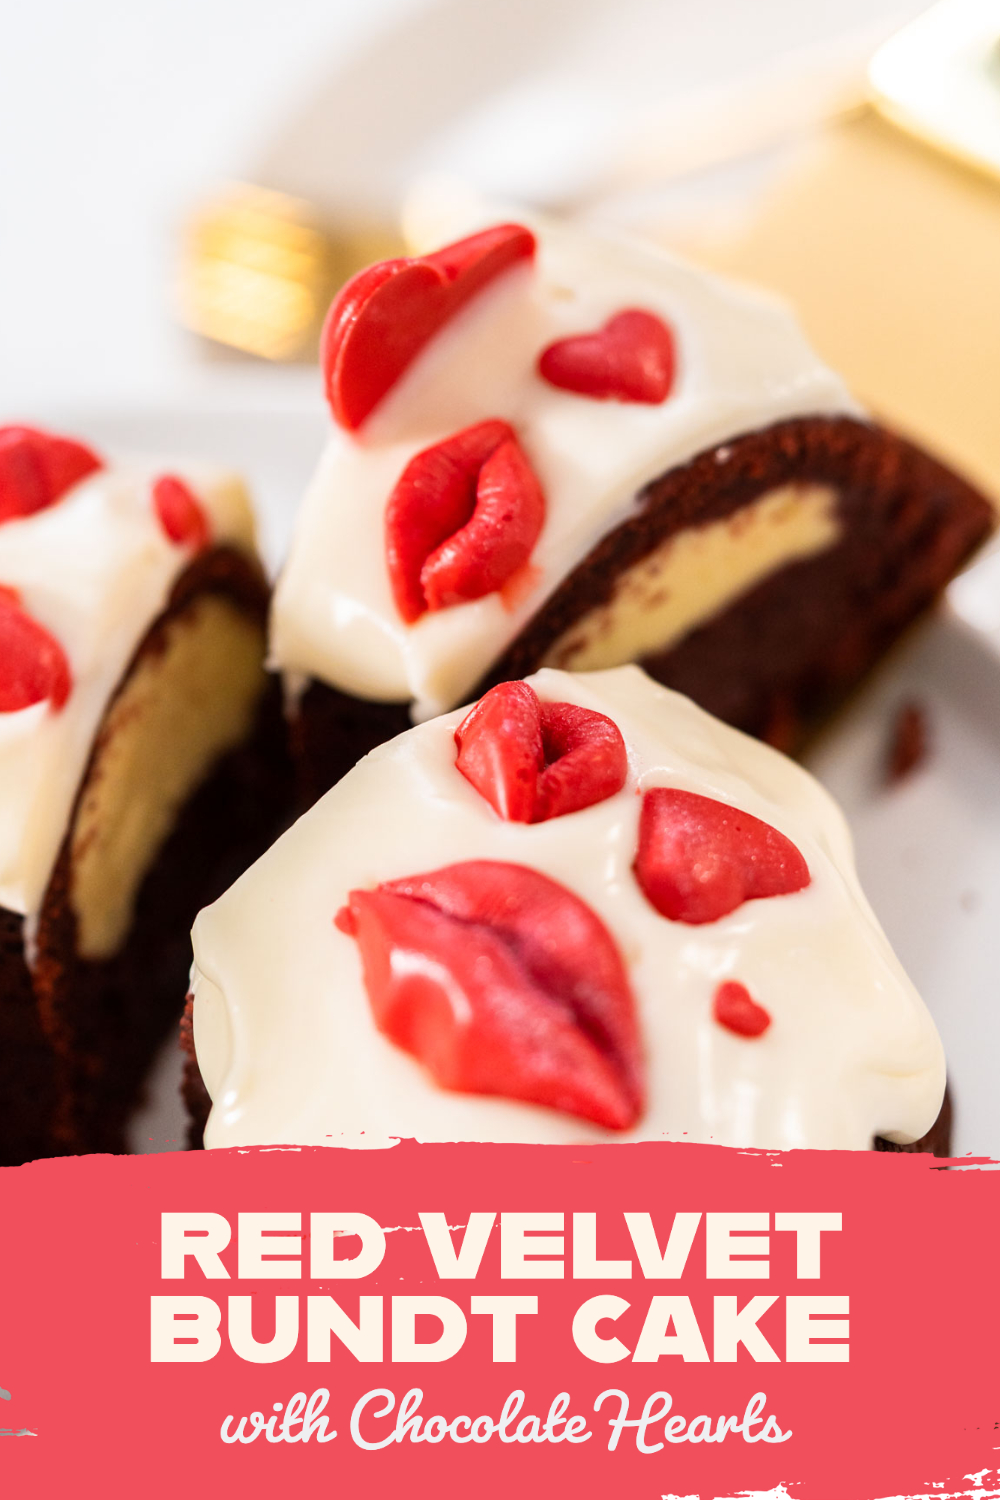 Red Velvet Bundt Cake with Chocolate Hearts